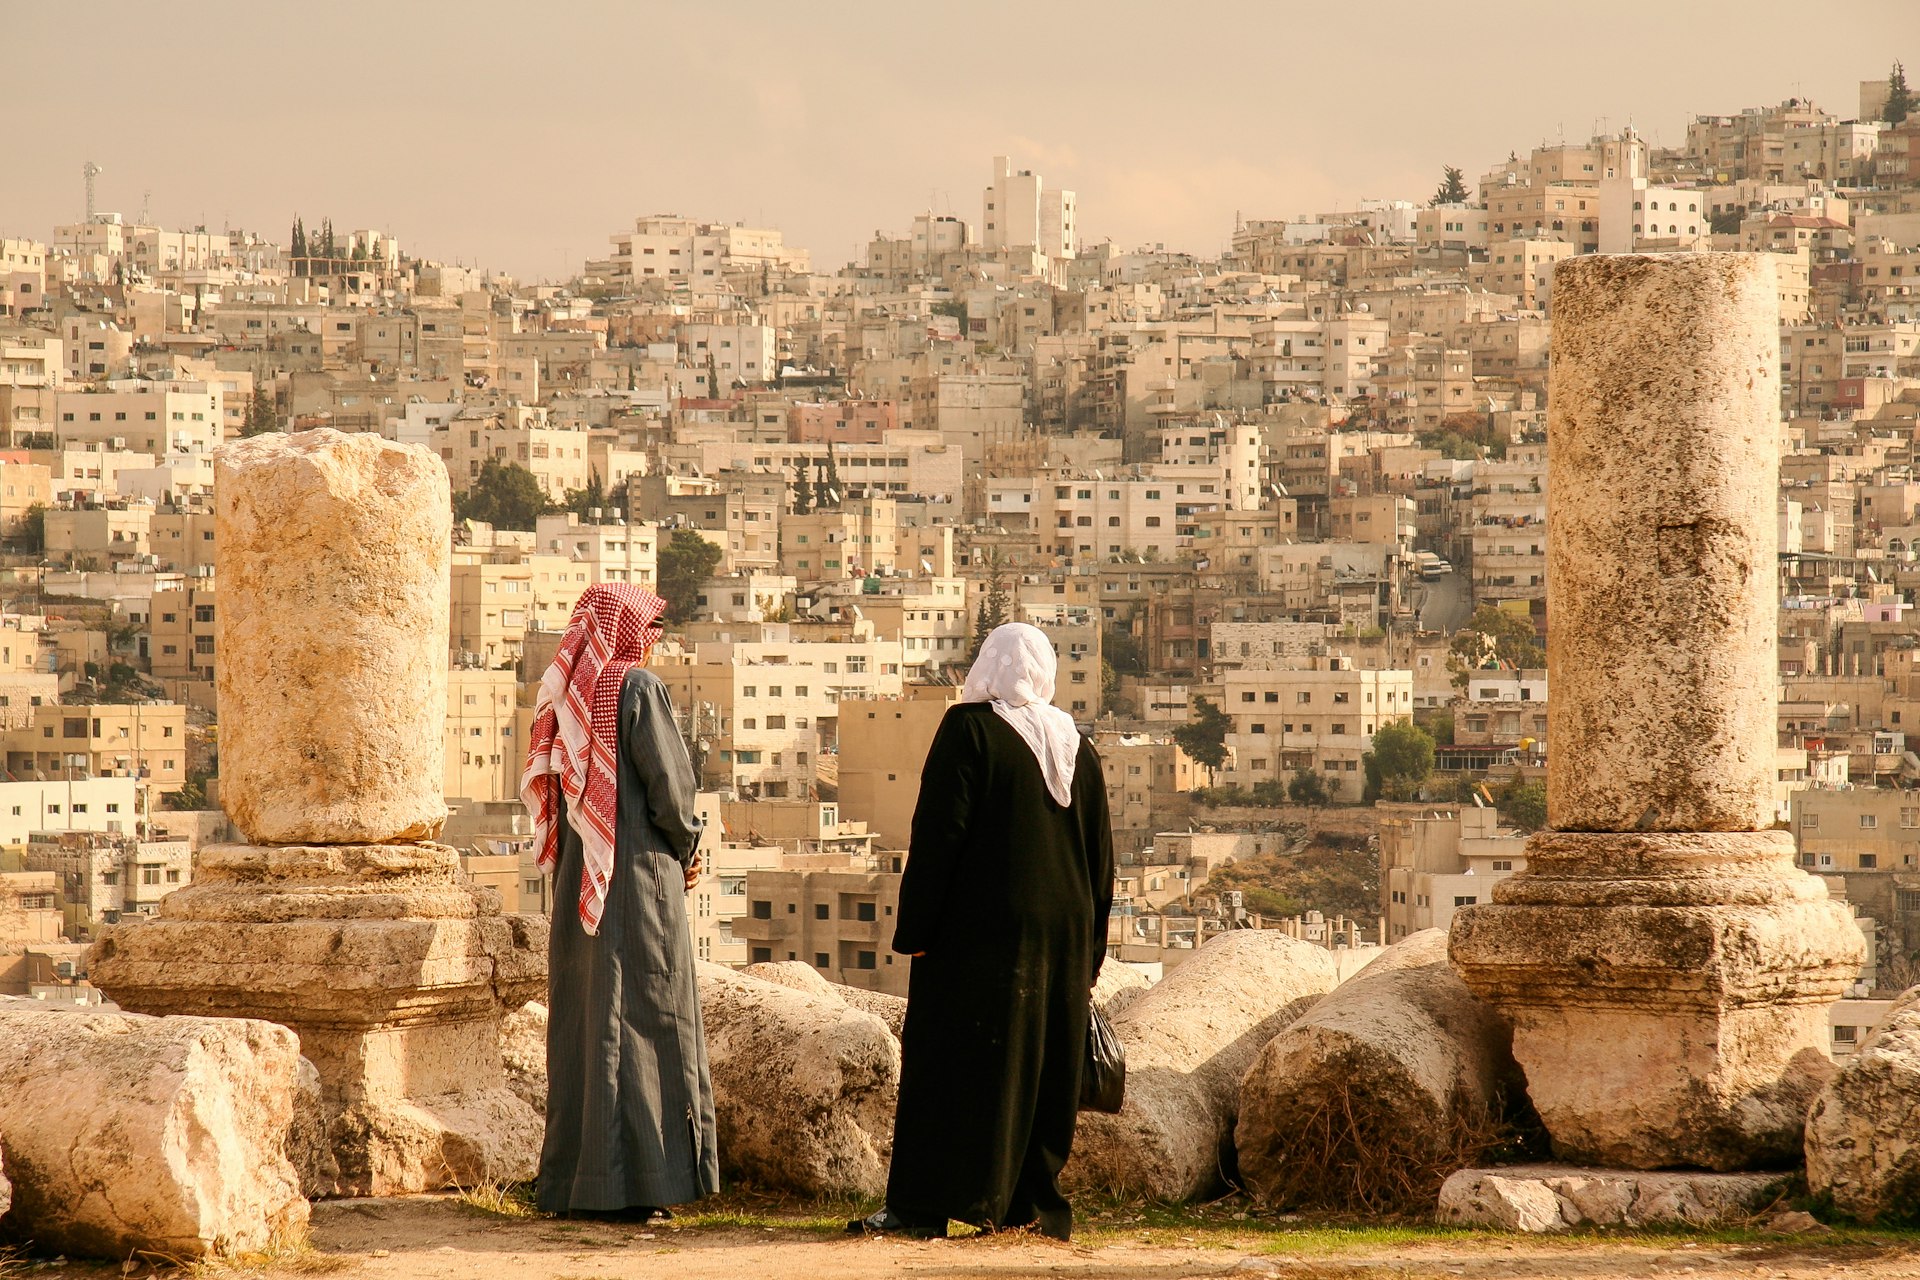 Two people in traditional Jordanian dress look out over the heavily developed hillsides of Amman